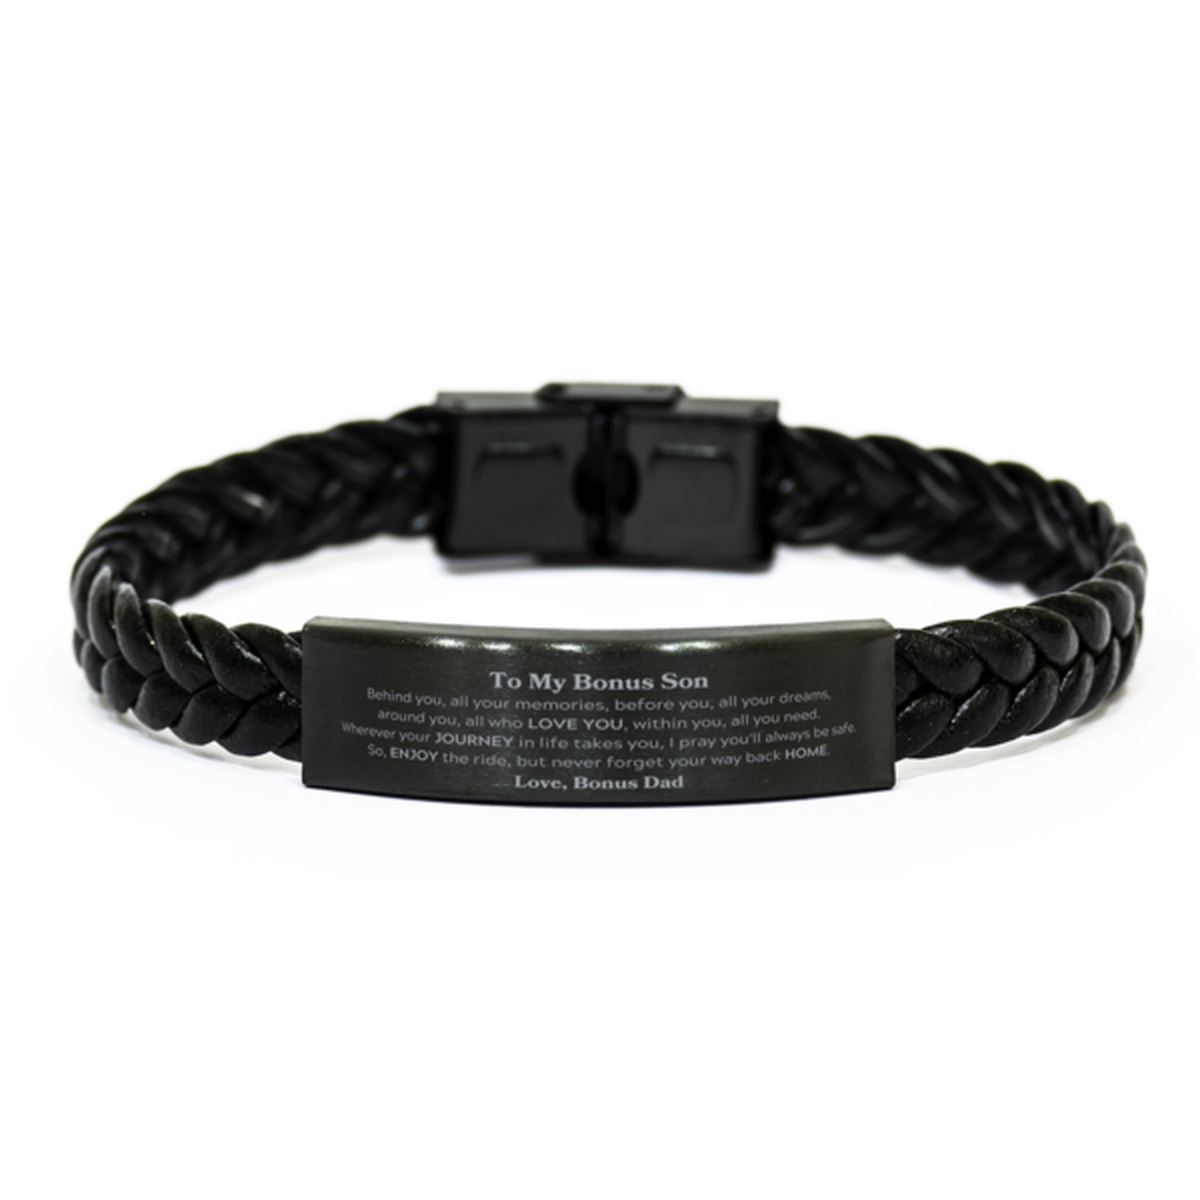 To My Bonus Son Graduation Gifts from Bonus Dad, Bonus Son Braided Leather Bracelet Christmas Birthday Gifts for Bonus Son Behind you, all your memories, before you, all your dreams. Love, Bonus Dad